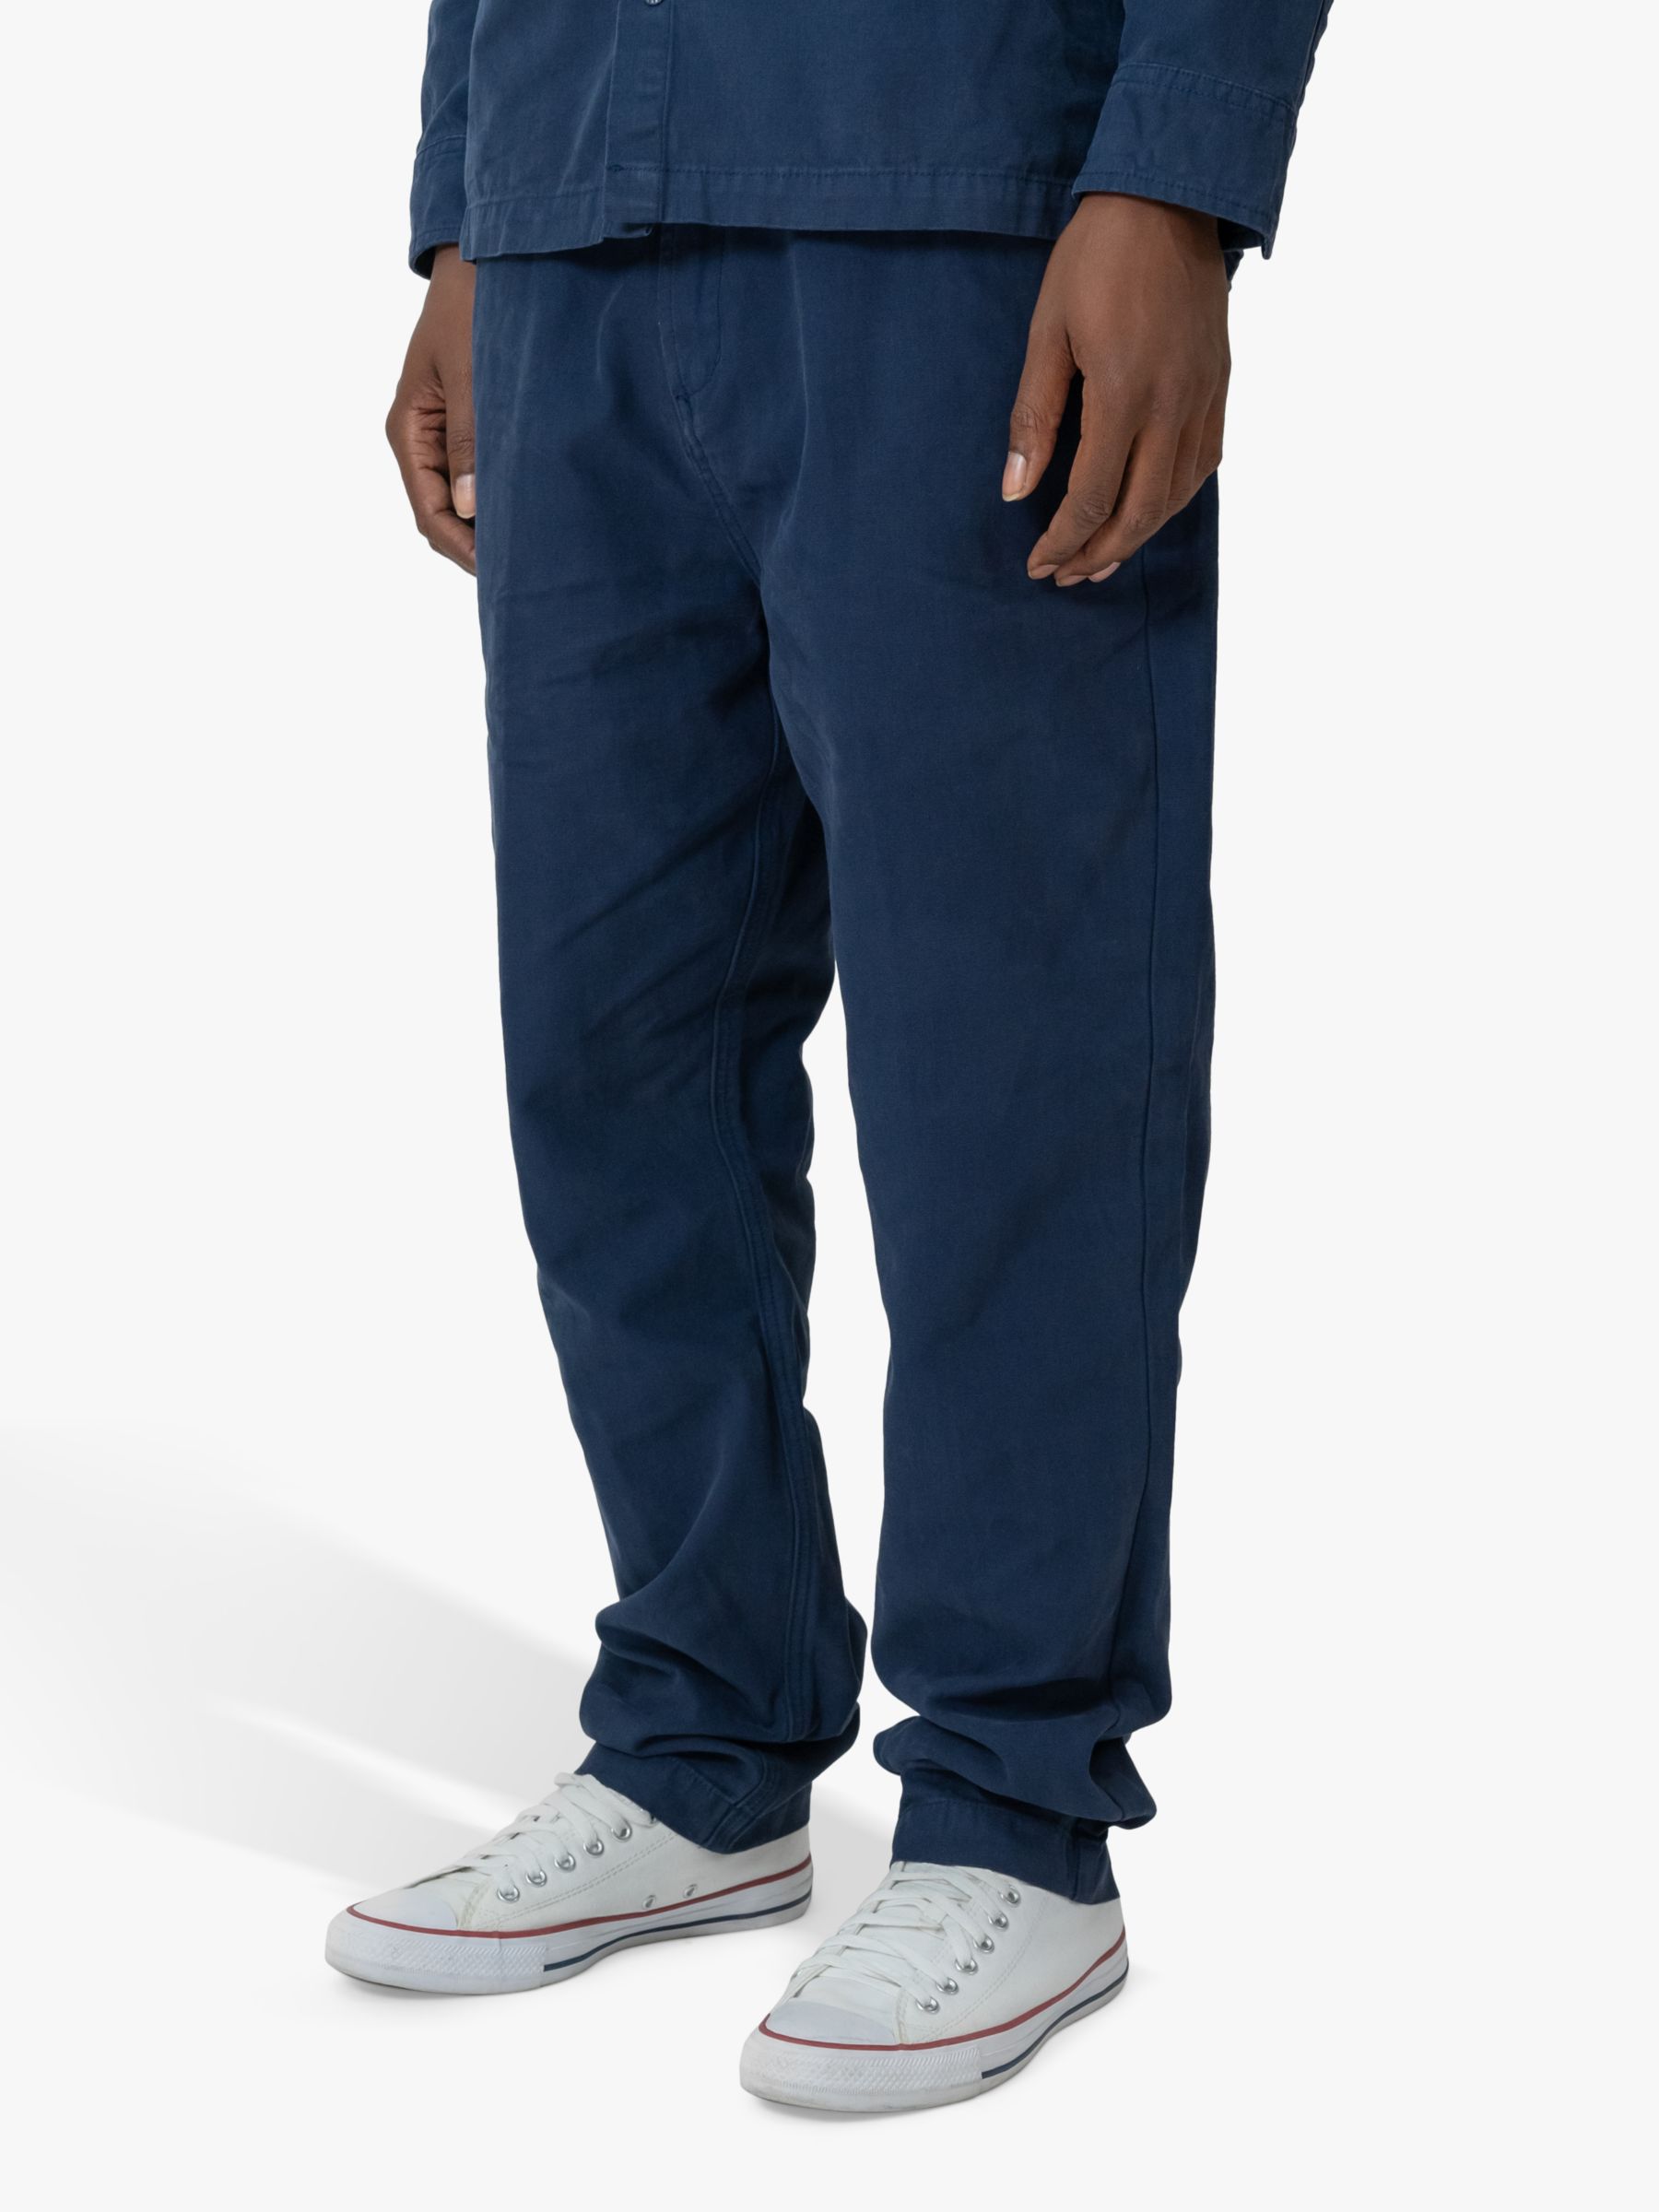 Buy M.C.Overalls Relaxed Fit Cotton Canvas Trousers Online at johnlewis.com